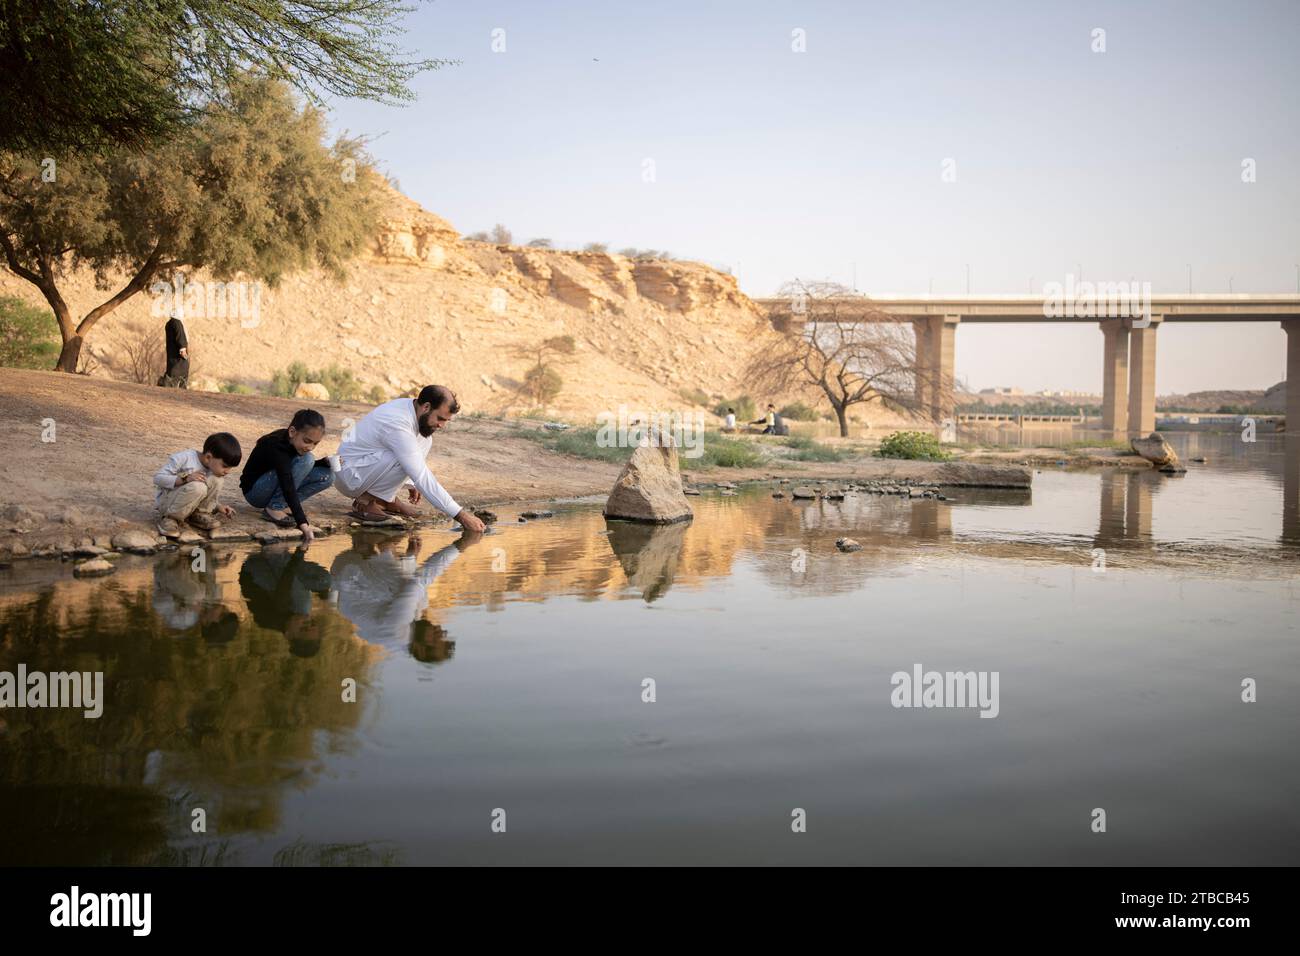 Daily life at Wadi Hanifa in Riyadh, Saudi Arabia on October 15, 2022, during the Noor Riyadh Festival 2022. Wadi Hanifa, historically known as Wadi al-Arad, is a wadi (seasonal river) in the Najd region, Riyadh Province, in central Saudi Arabia. The valley runs for a length of 120 km from northwest to southeast, cutting through the city of Riyadh. A string of towns and villages lie along the valley, including Uyaynah, Irqah and Diriyah. The historical city of Riyadh itself is on the northeastern side of the wadi, but the city has now expanded across Wadi Hanifa, with the sub-municipalities of Stock Photo